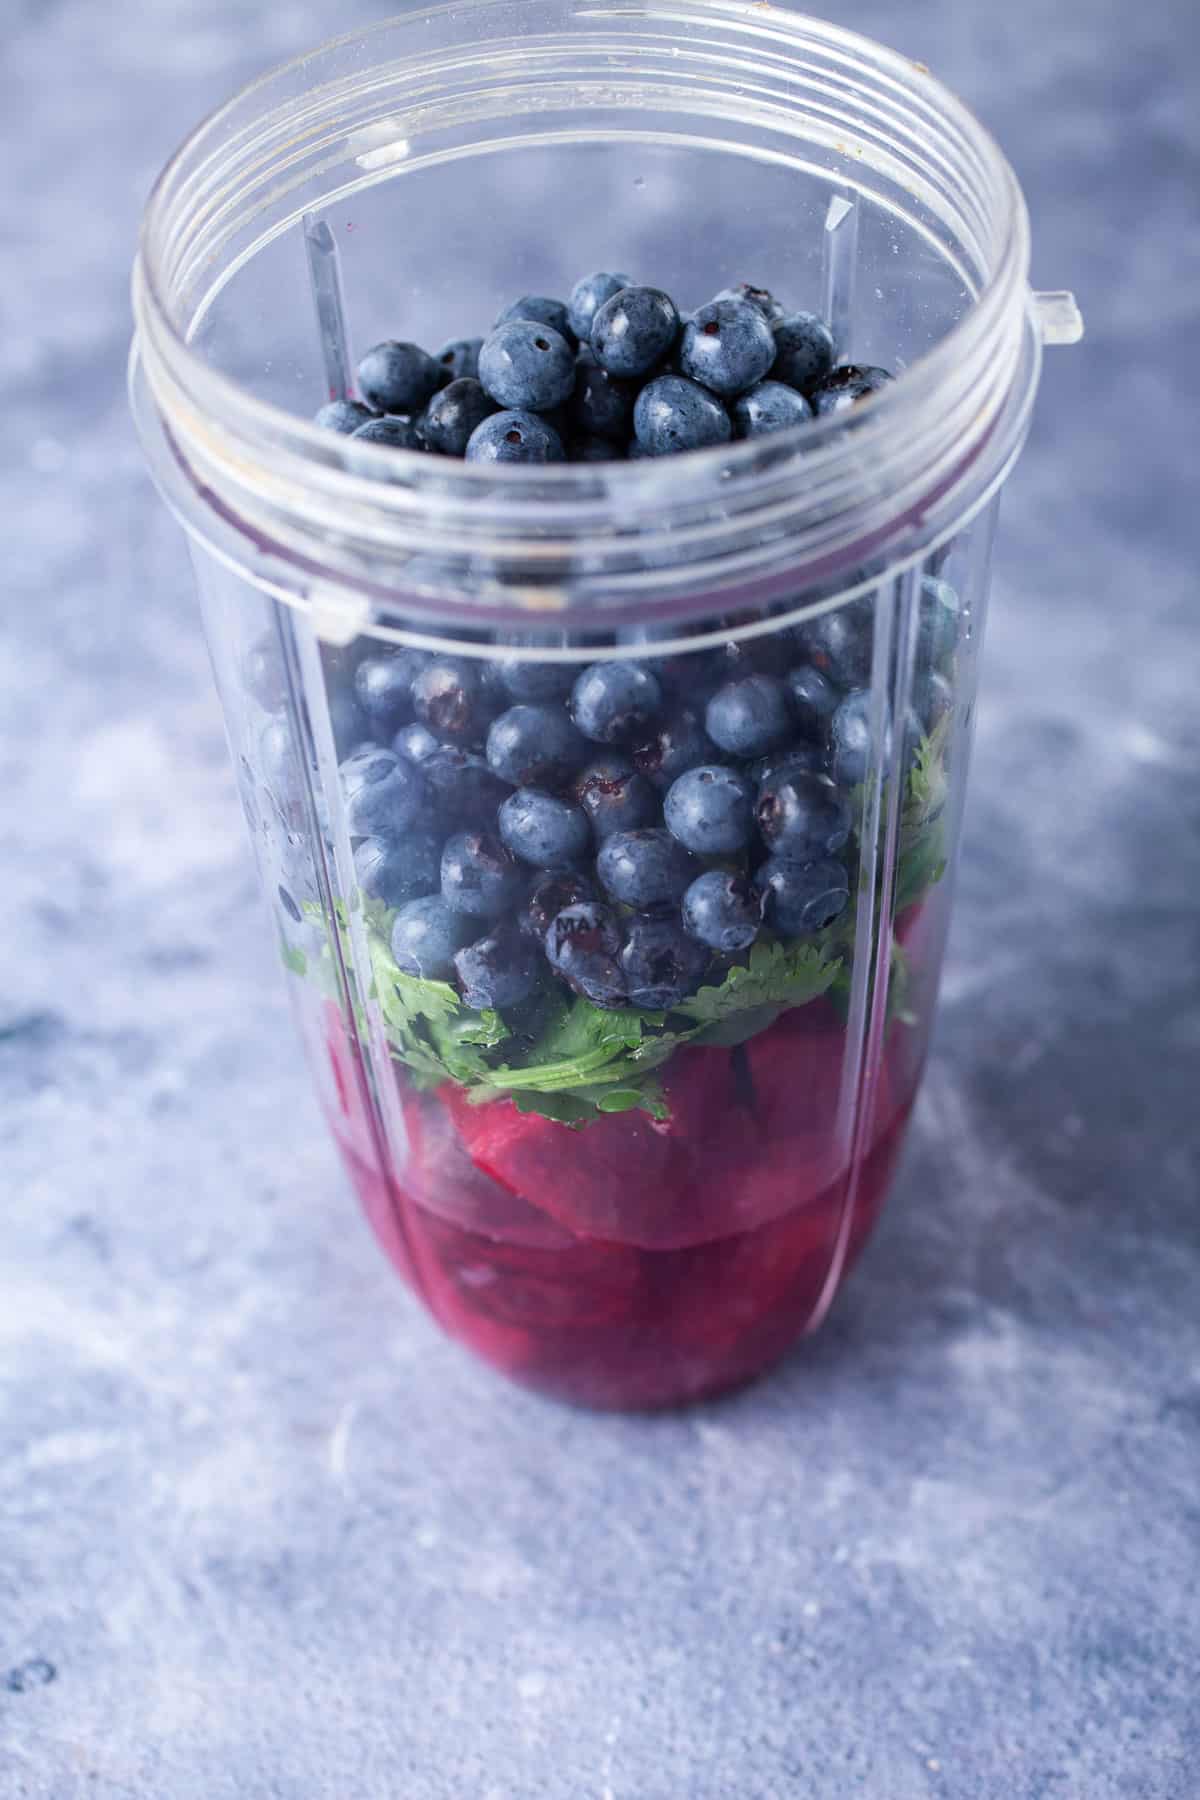 A blender filled with juice, cilantro, beets, and bleuberries.